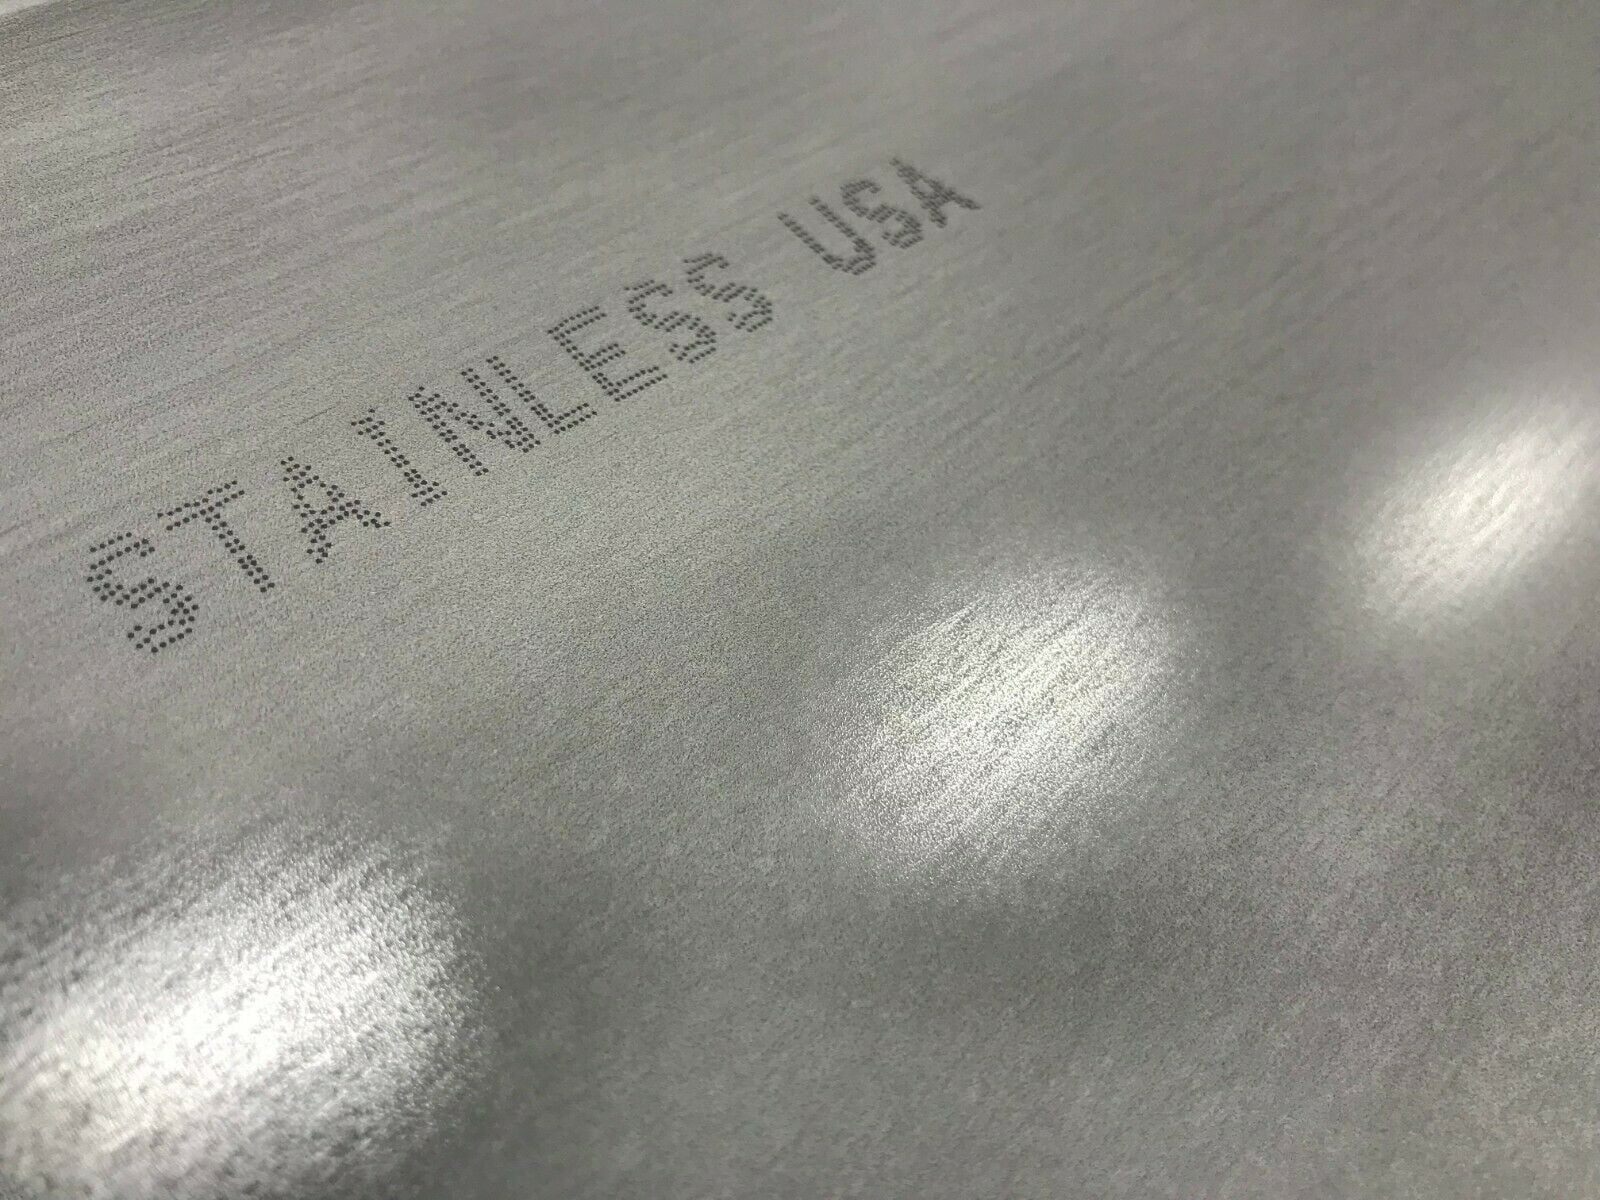 3/16" x 2" x 4" 3/16" Stainless Steel Plate 304 SS 